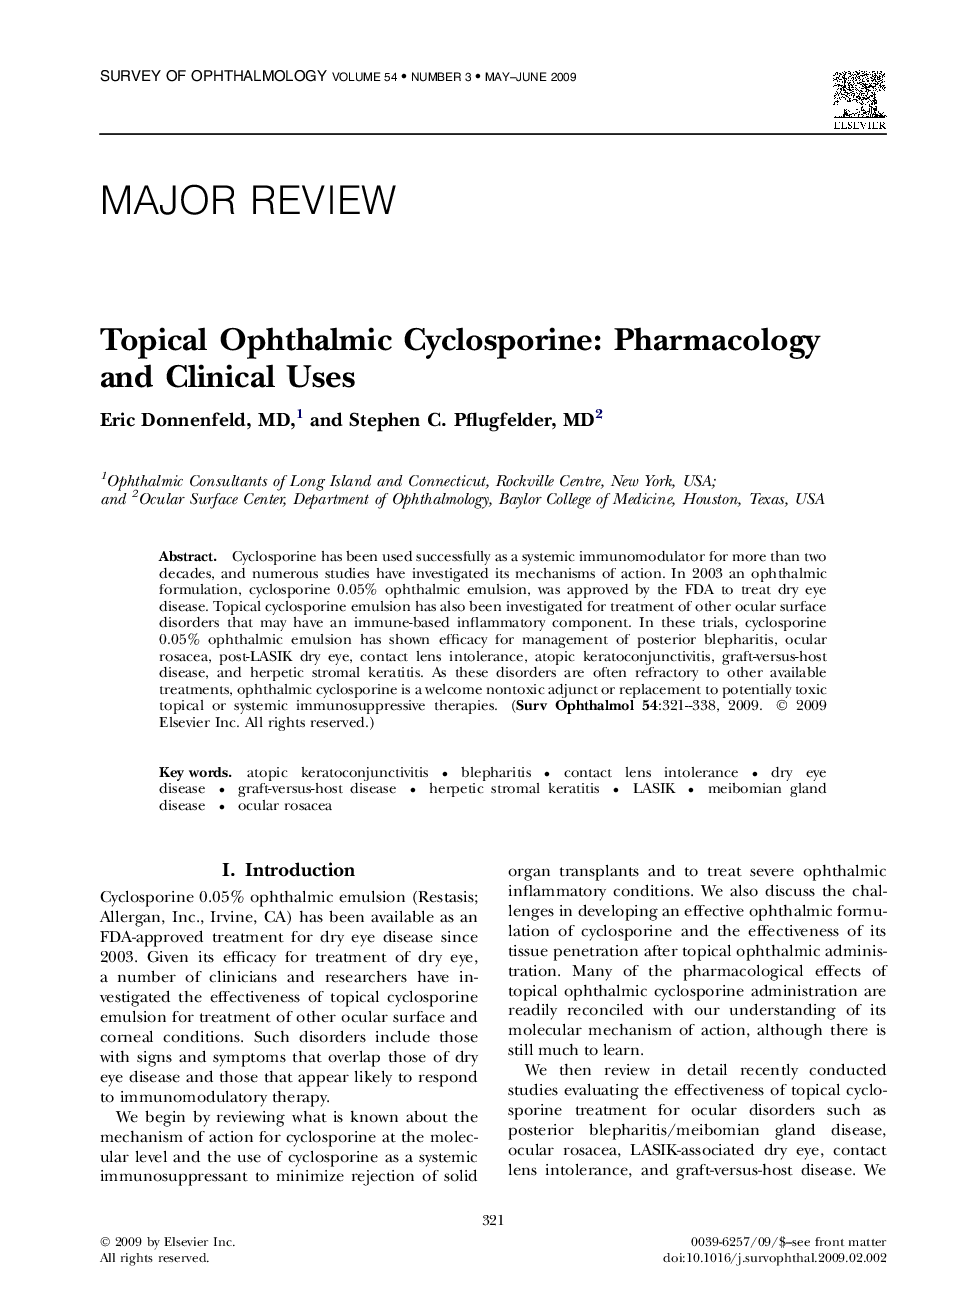 Topical Ophthalmic Cyclosporine: Pharmacology and Clinical Uses 